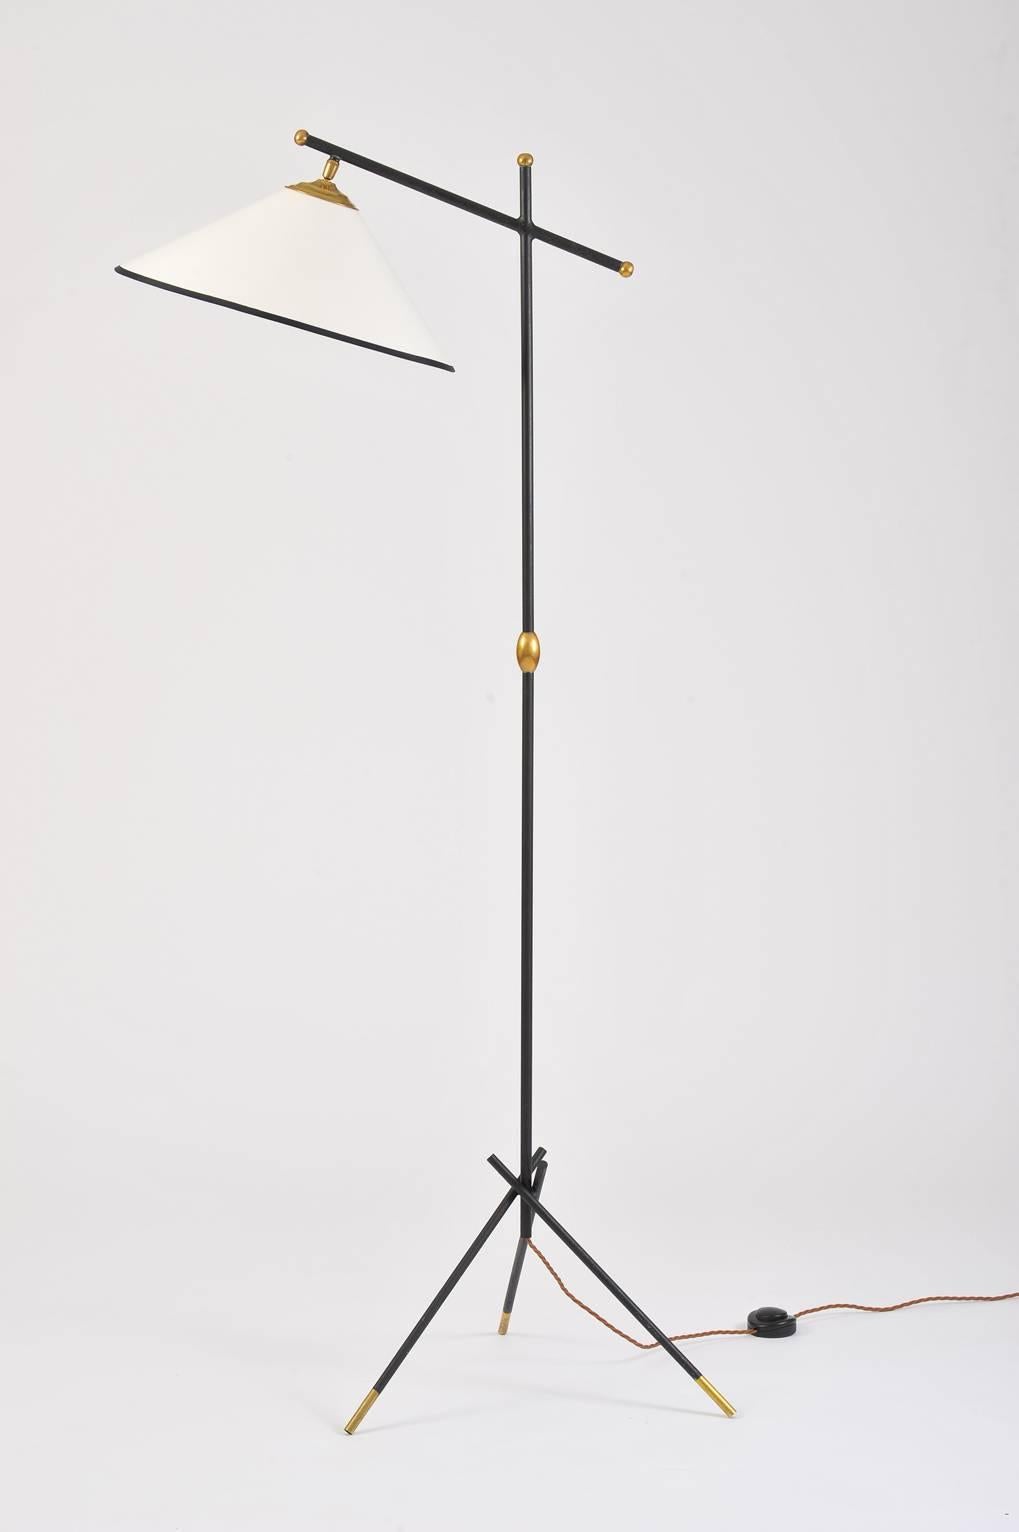 A brass and black enameled iron floor lamp, with its original shade recovered in new black edged ivory fabric, swiveling and orientation adjustable,
France, circa 1950.